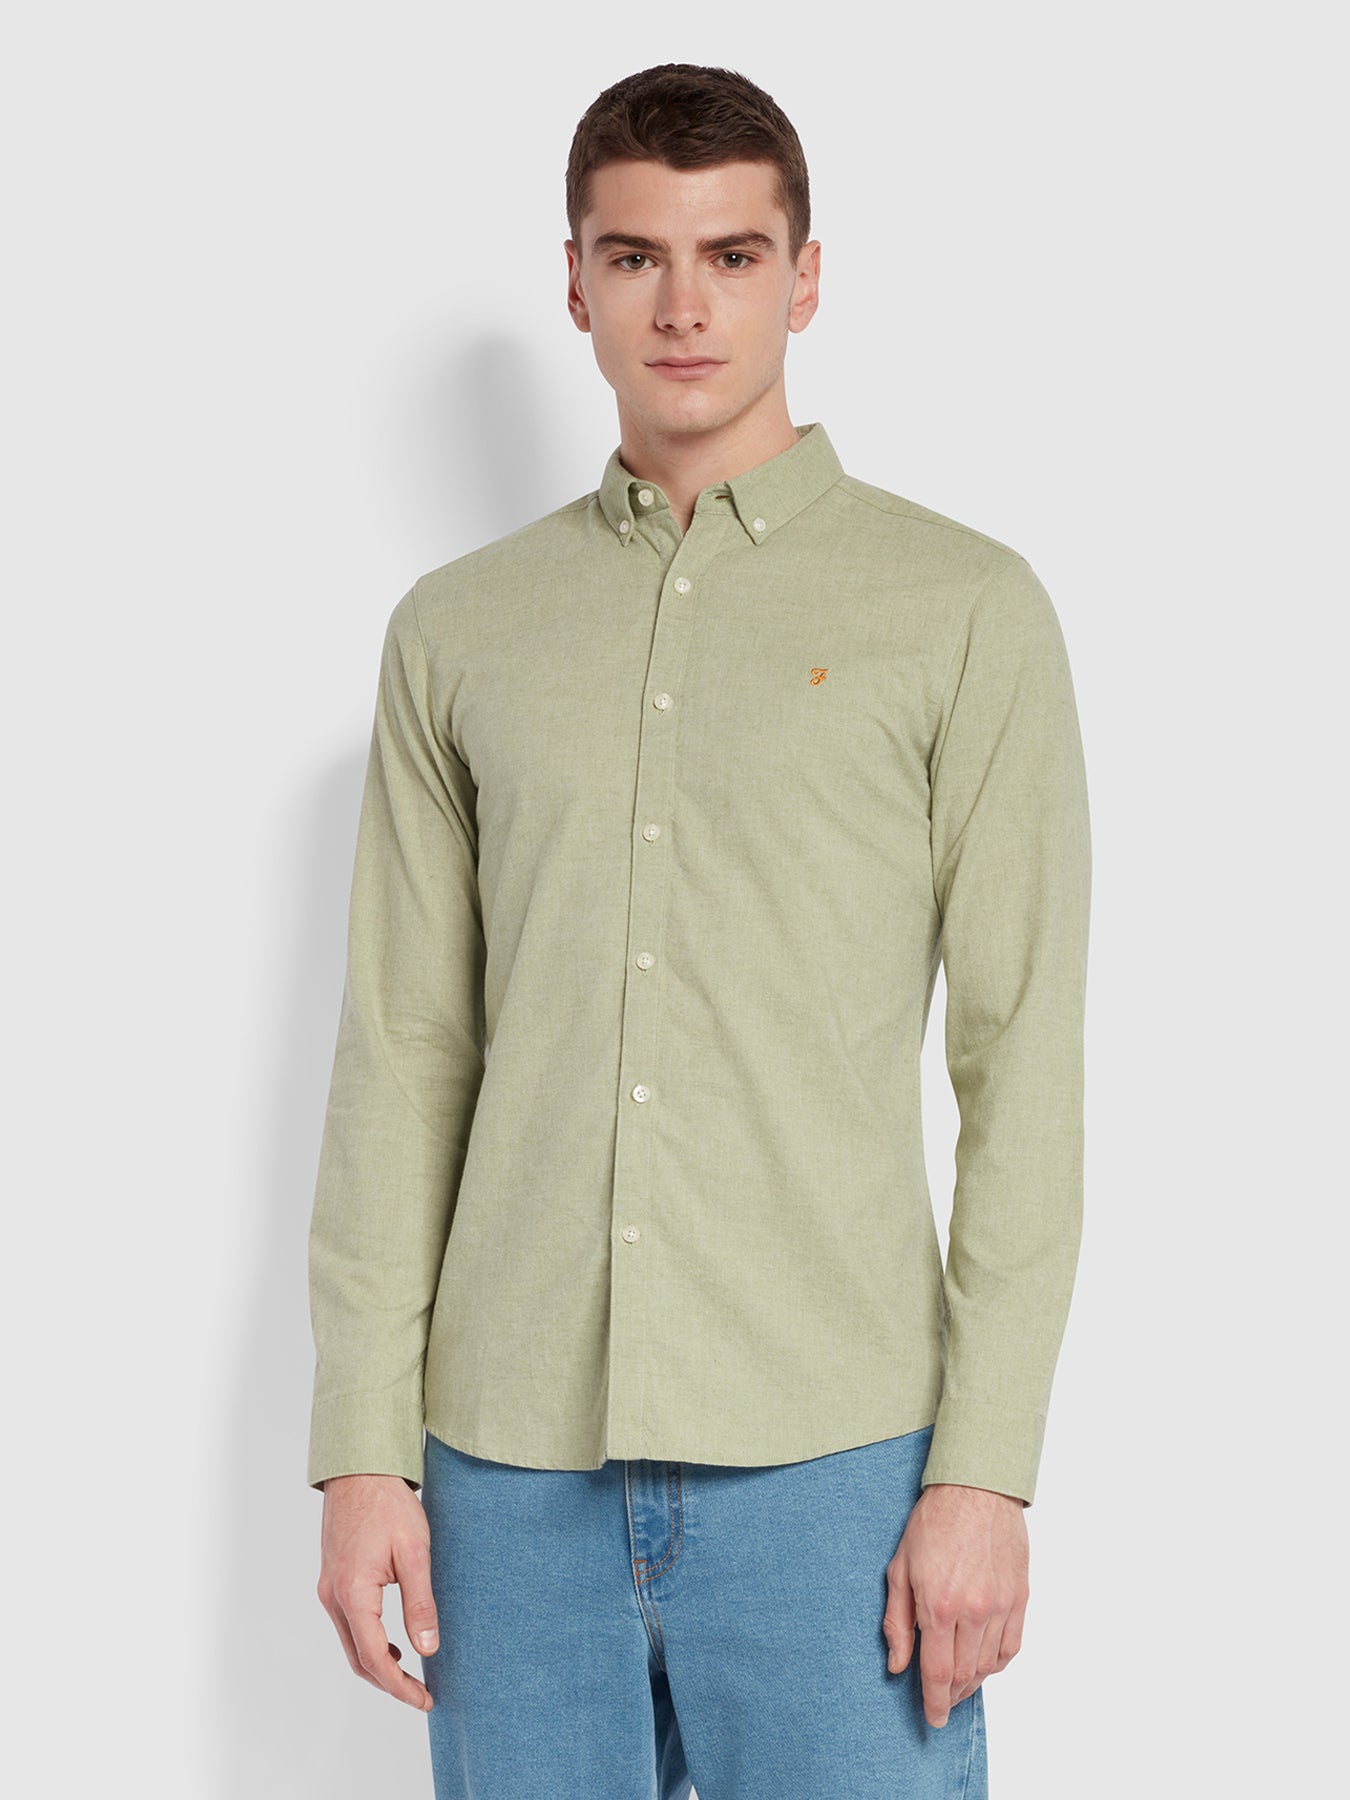 View Steen Slim Fit Long Sleeve Brushed Shirt In Moss Green information